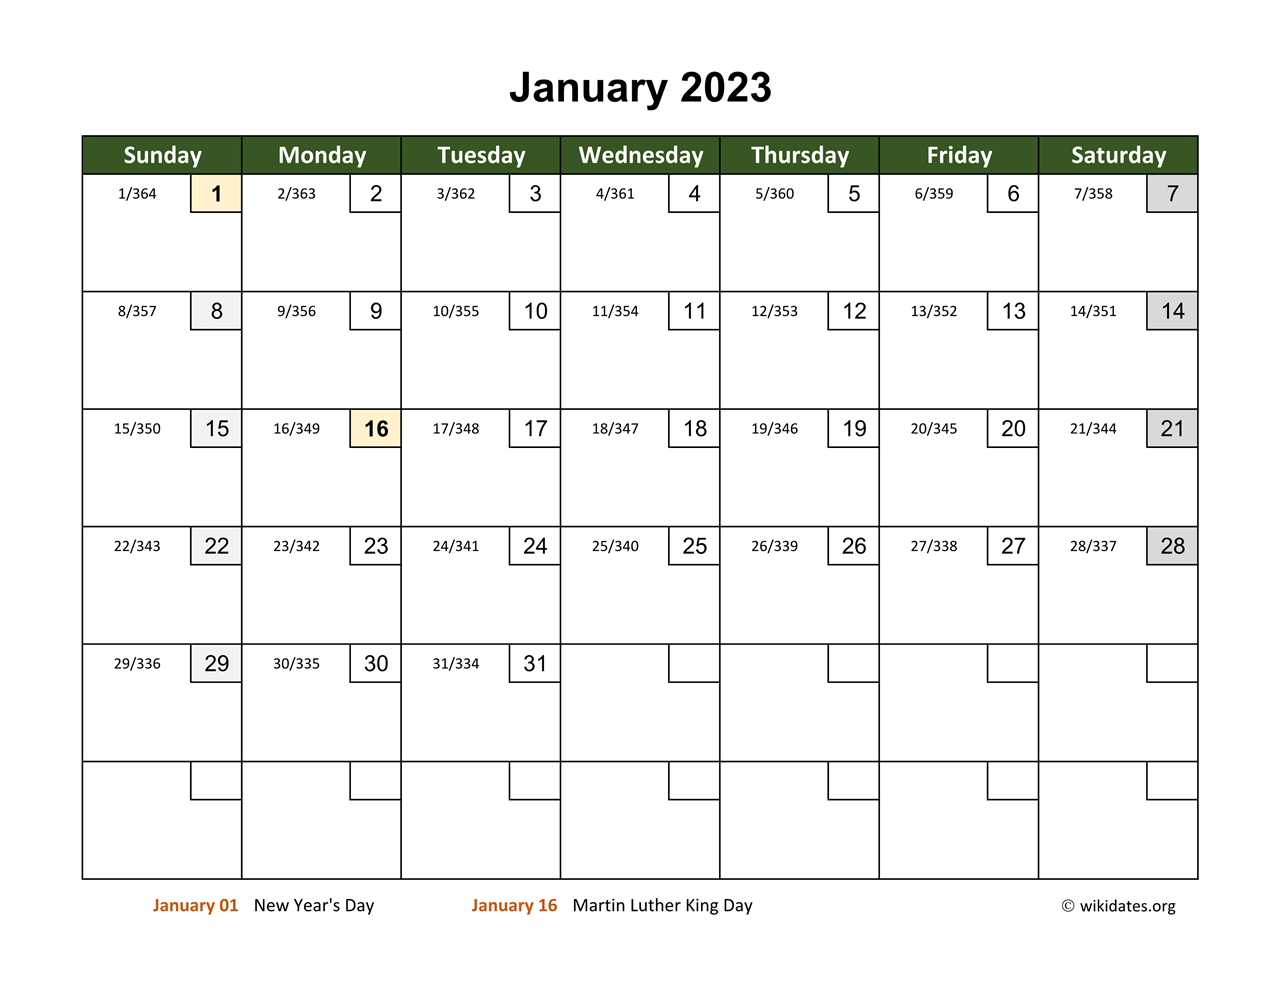 Monthly 2023 Calendar with Day Numbers | WikiDates.org